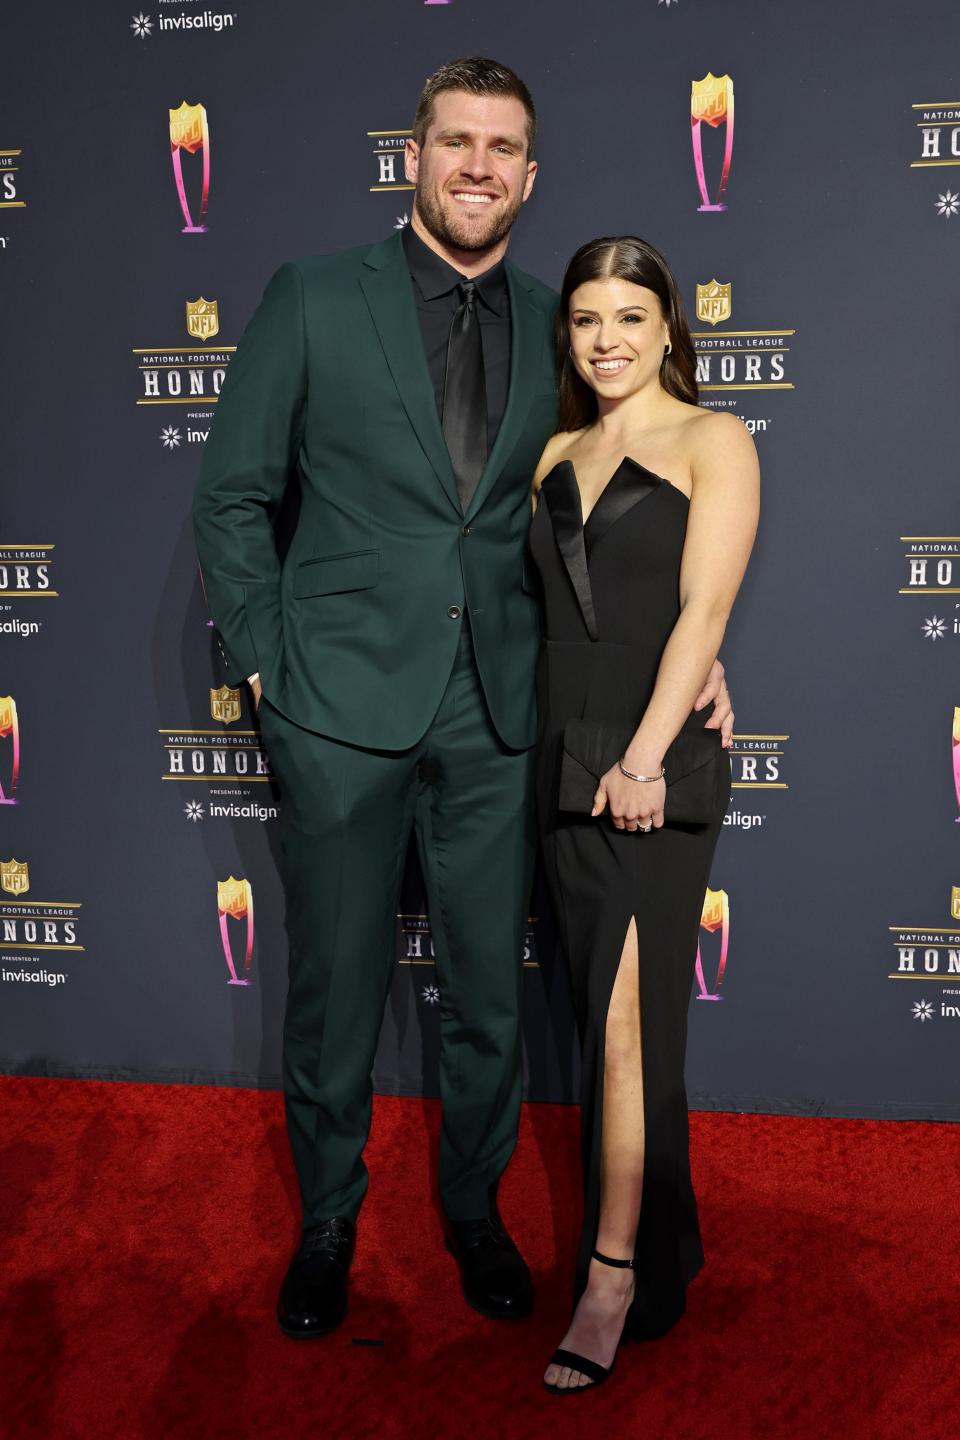 T. J. Watt and fiancée Dani Rhodes attend the 11th annual NFL Honors at YouTube Theater on Feb. 10, 2022, in Inglewood, California. Watt won the Defensive Player of the Year award later that night.